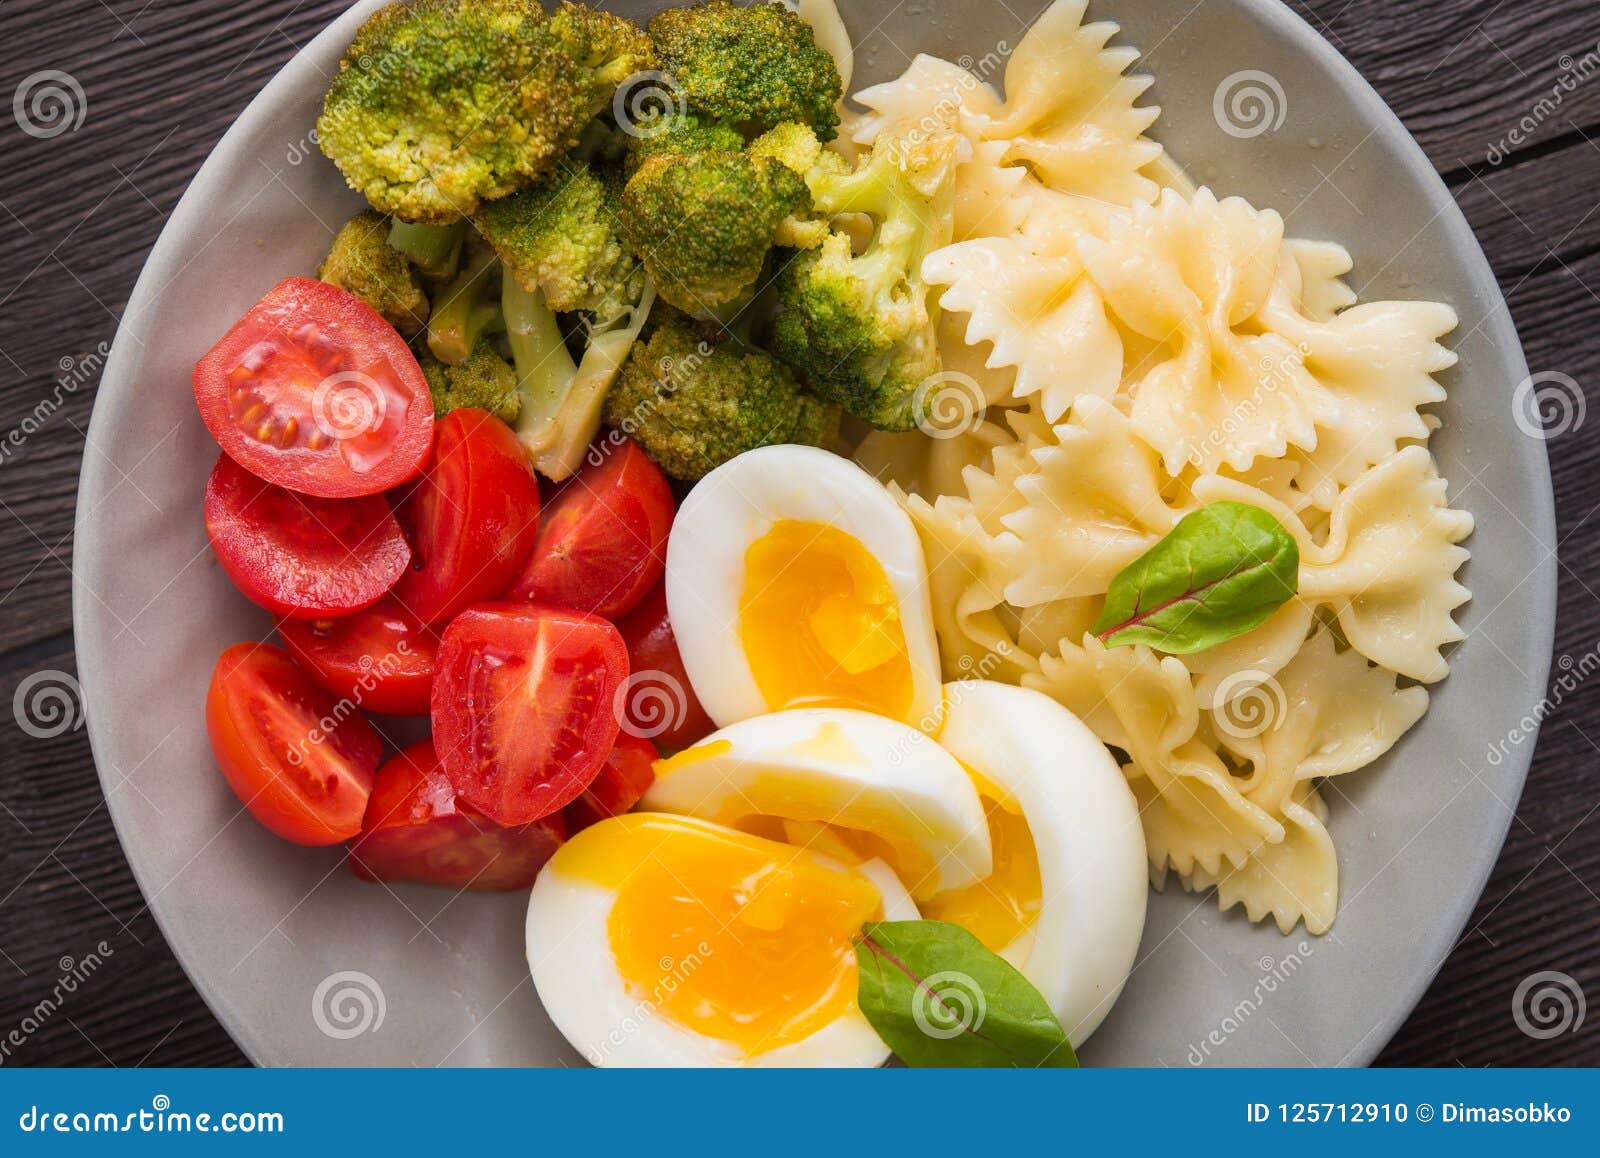 Farfalle Pasta with Egg, Tomato and Broccoli in a Bowl Stock Photo - Image  of dinner, table: 125712910